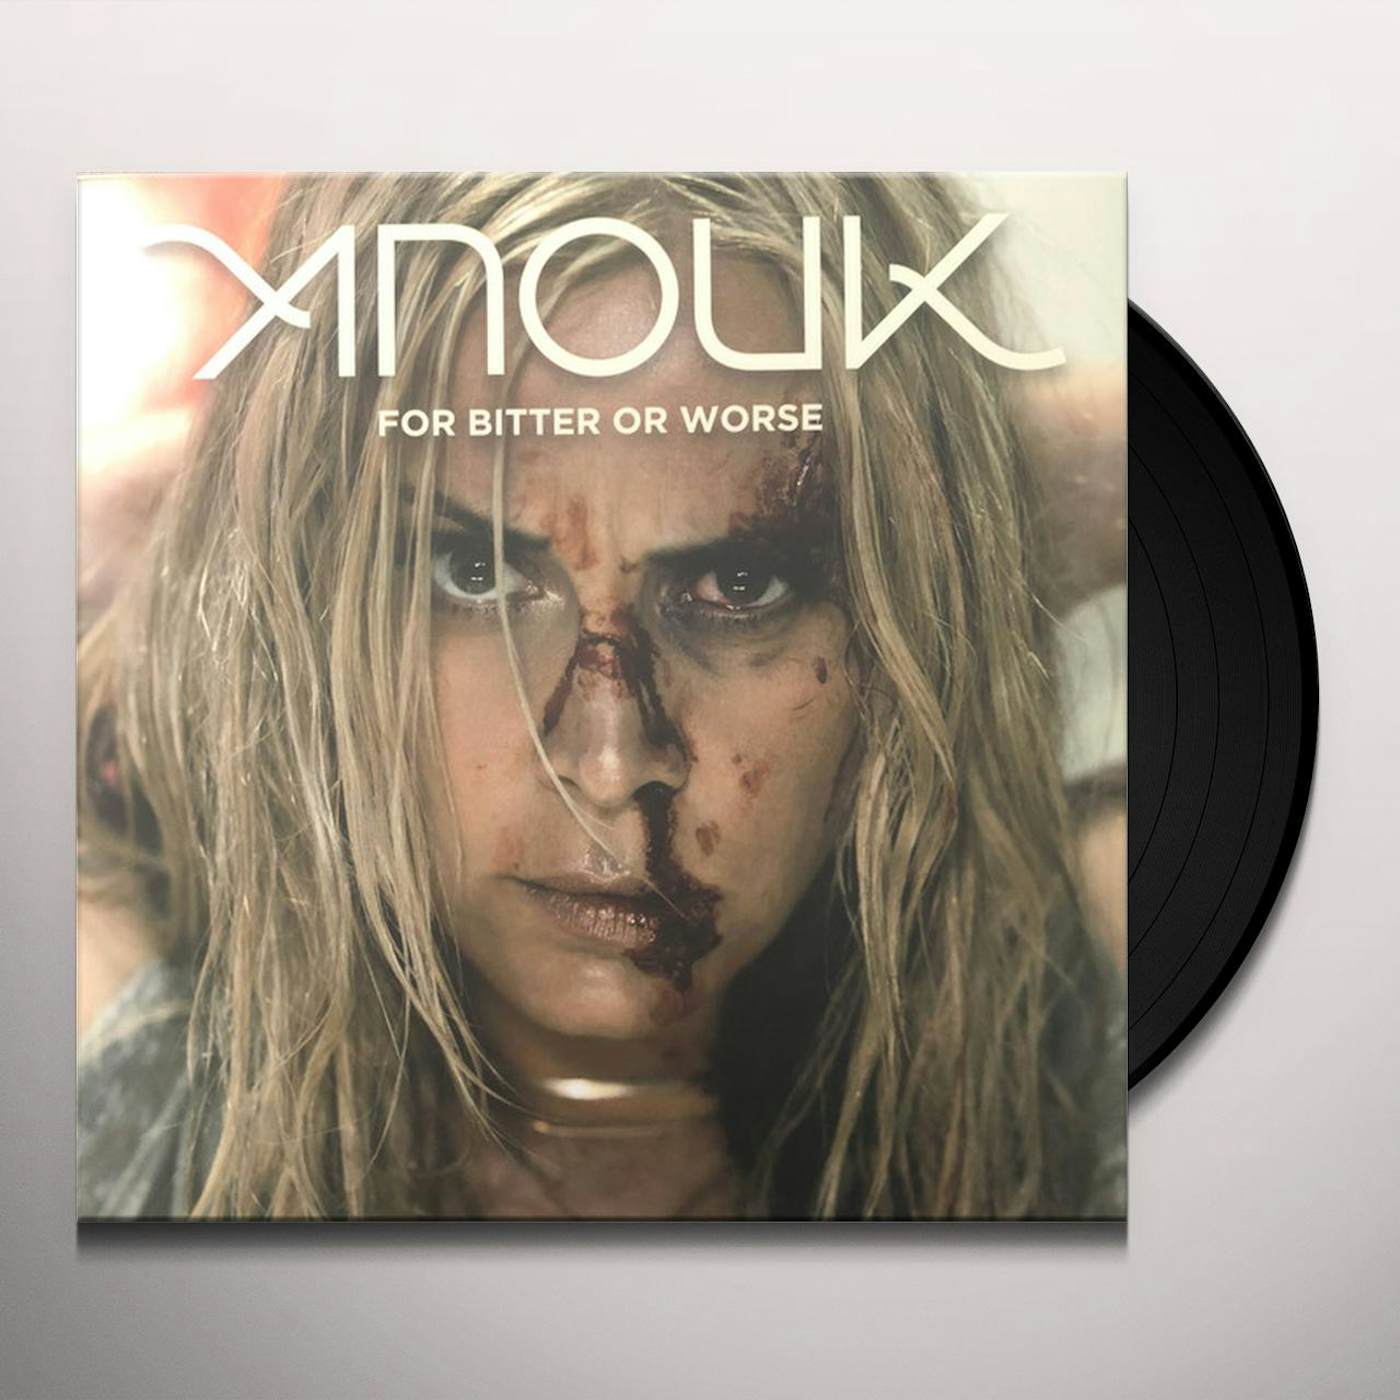 Anouk FOR BITTER OR WORSE (LIMITED GOLD VINYL/180G/PRINTED INNERSLEEVE/NUMBERED/IMPORT) Vinyl Record